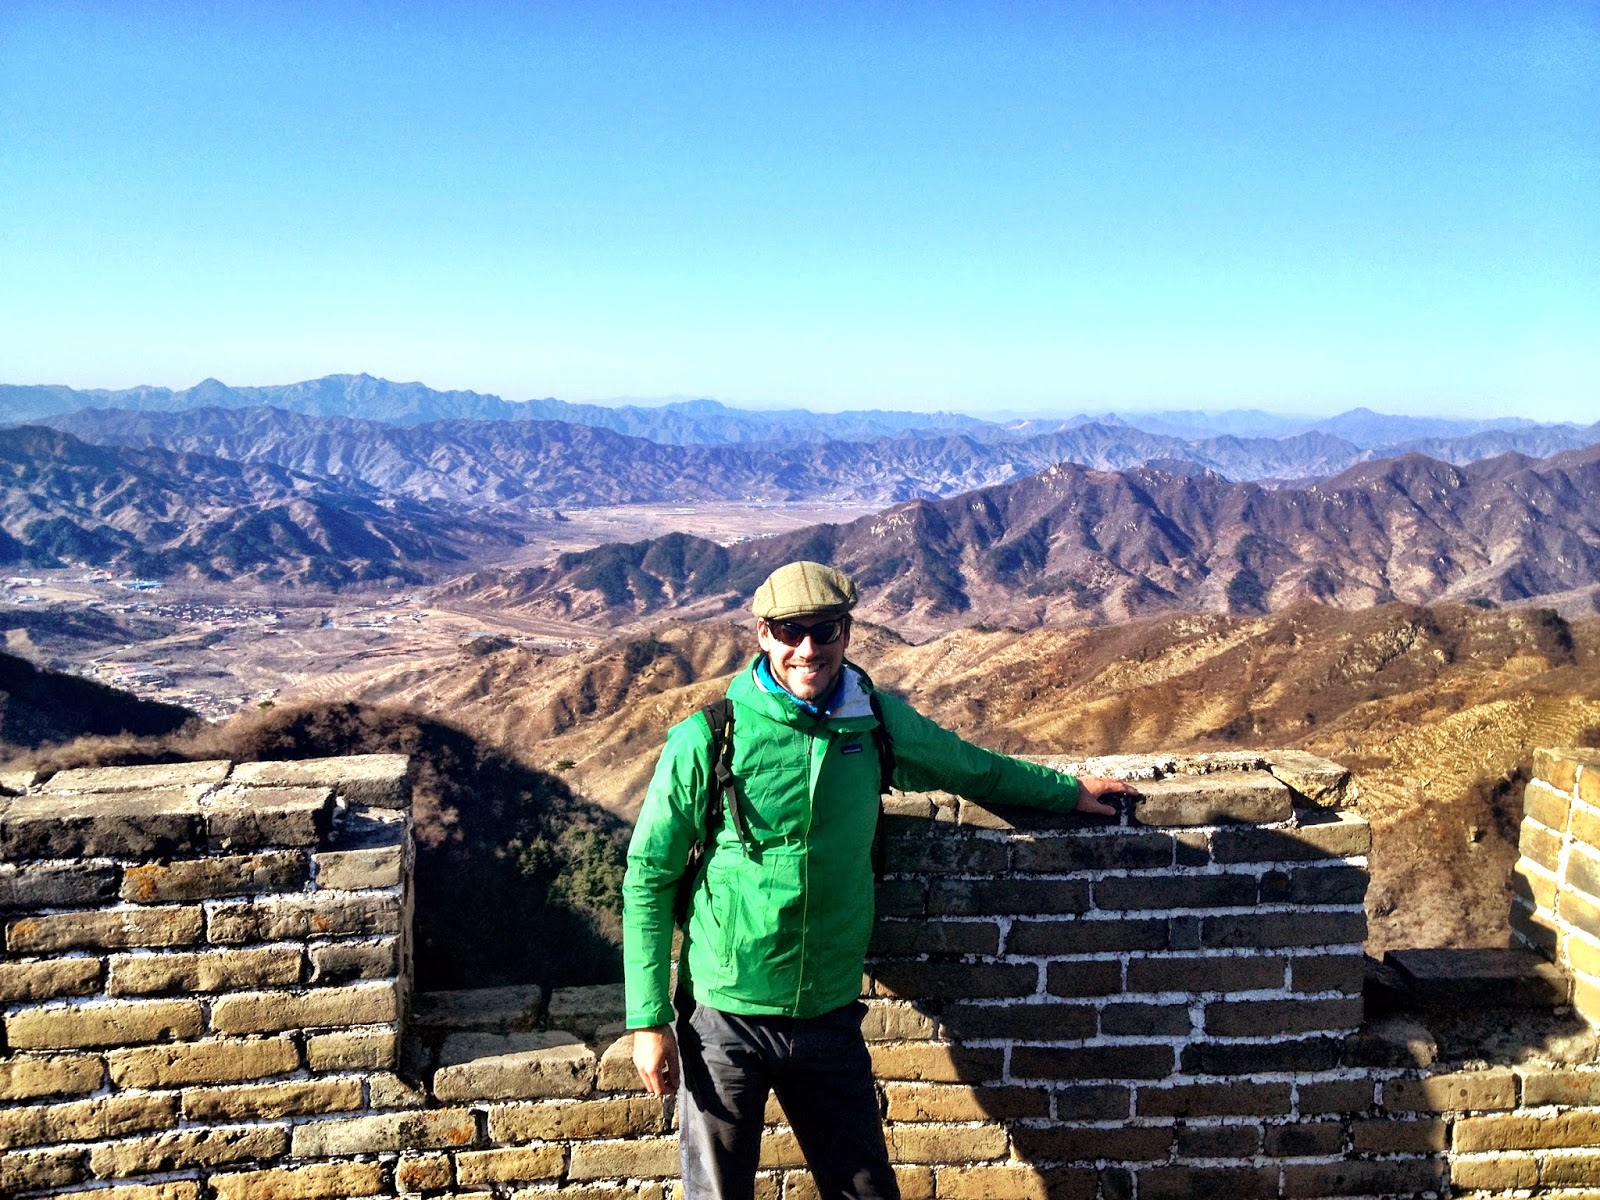 Me on The Great Wall Of China - March 2013